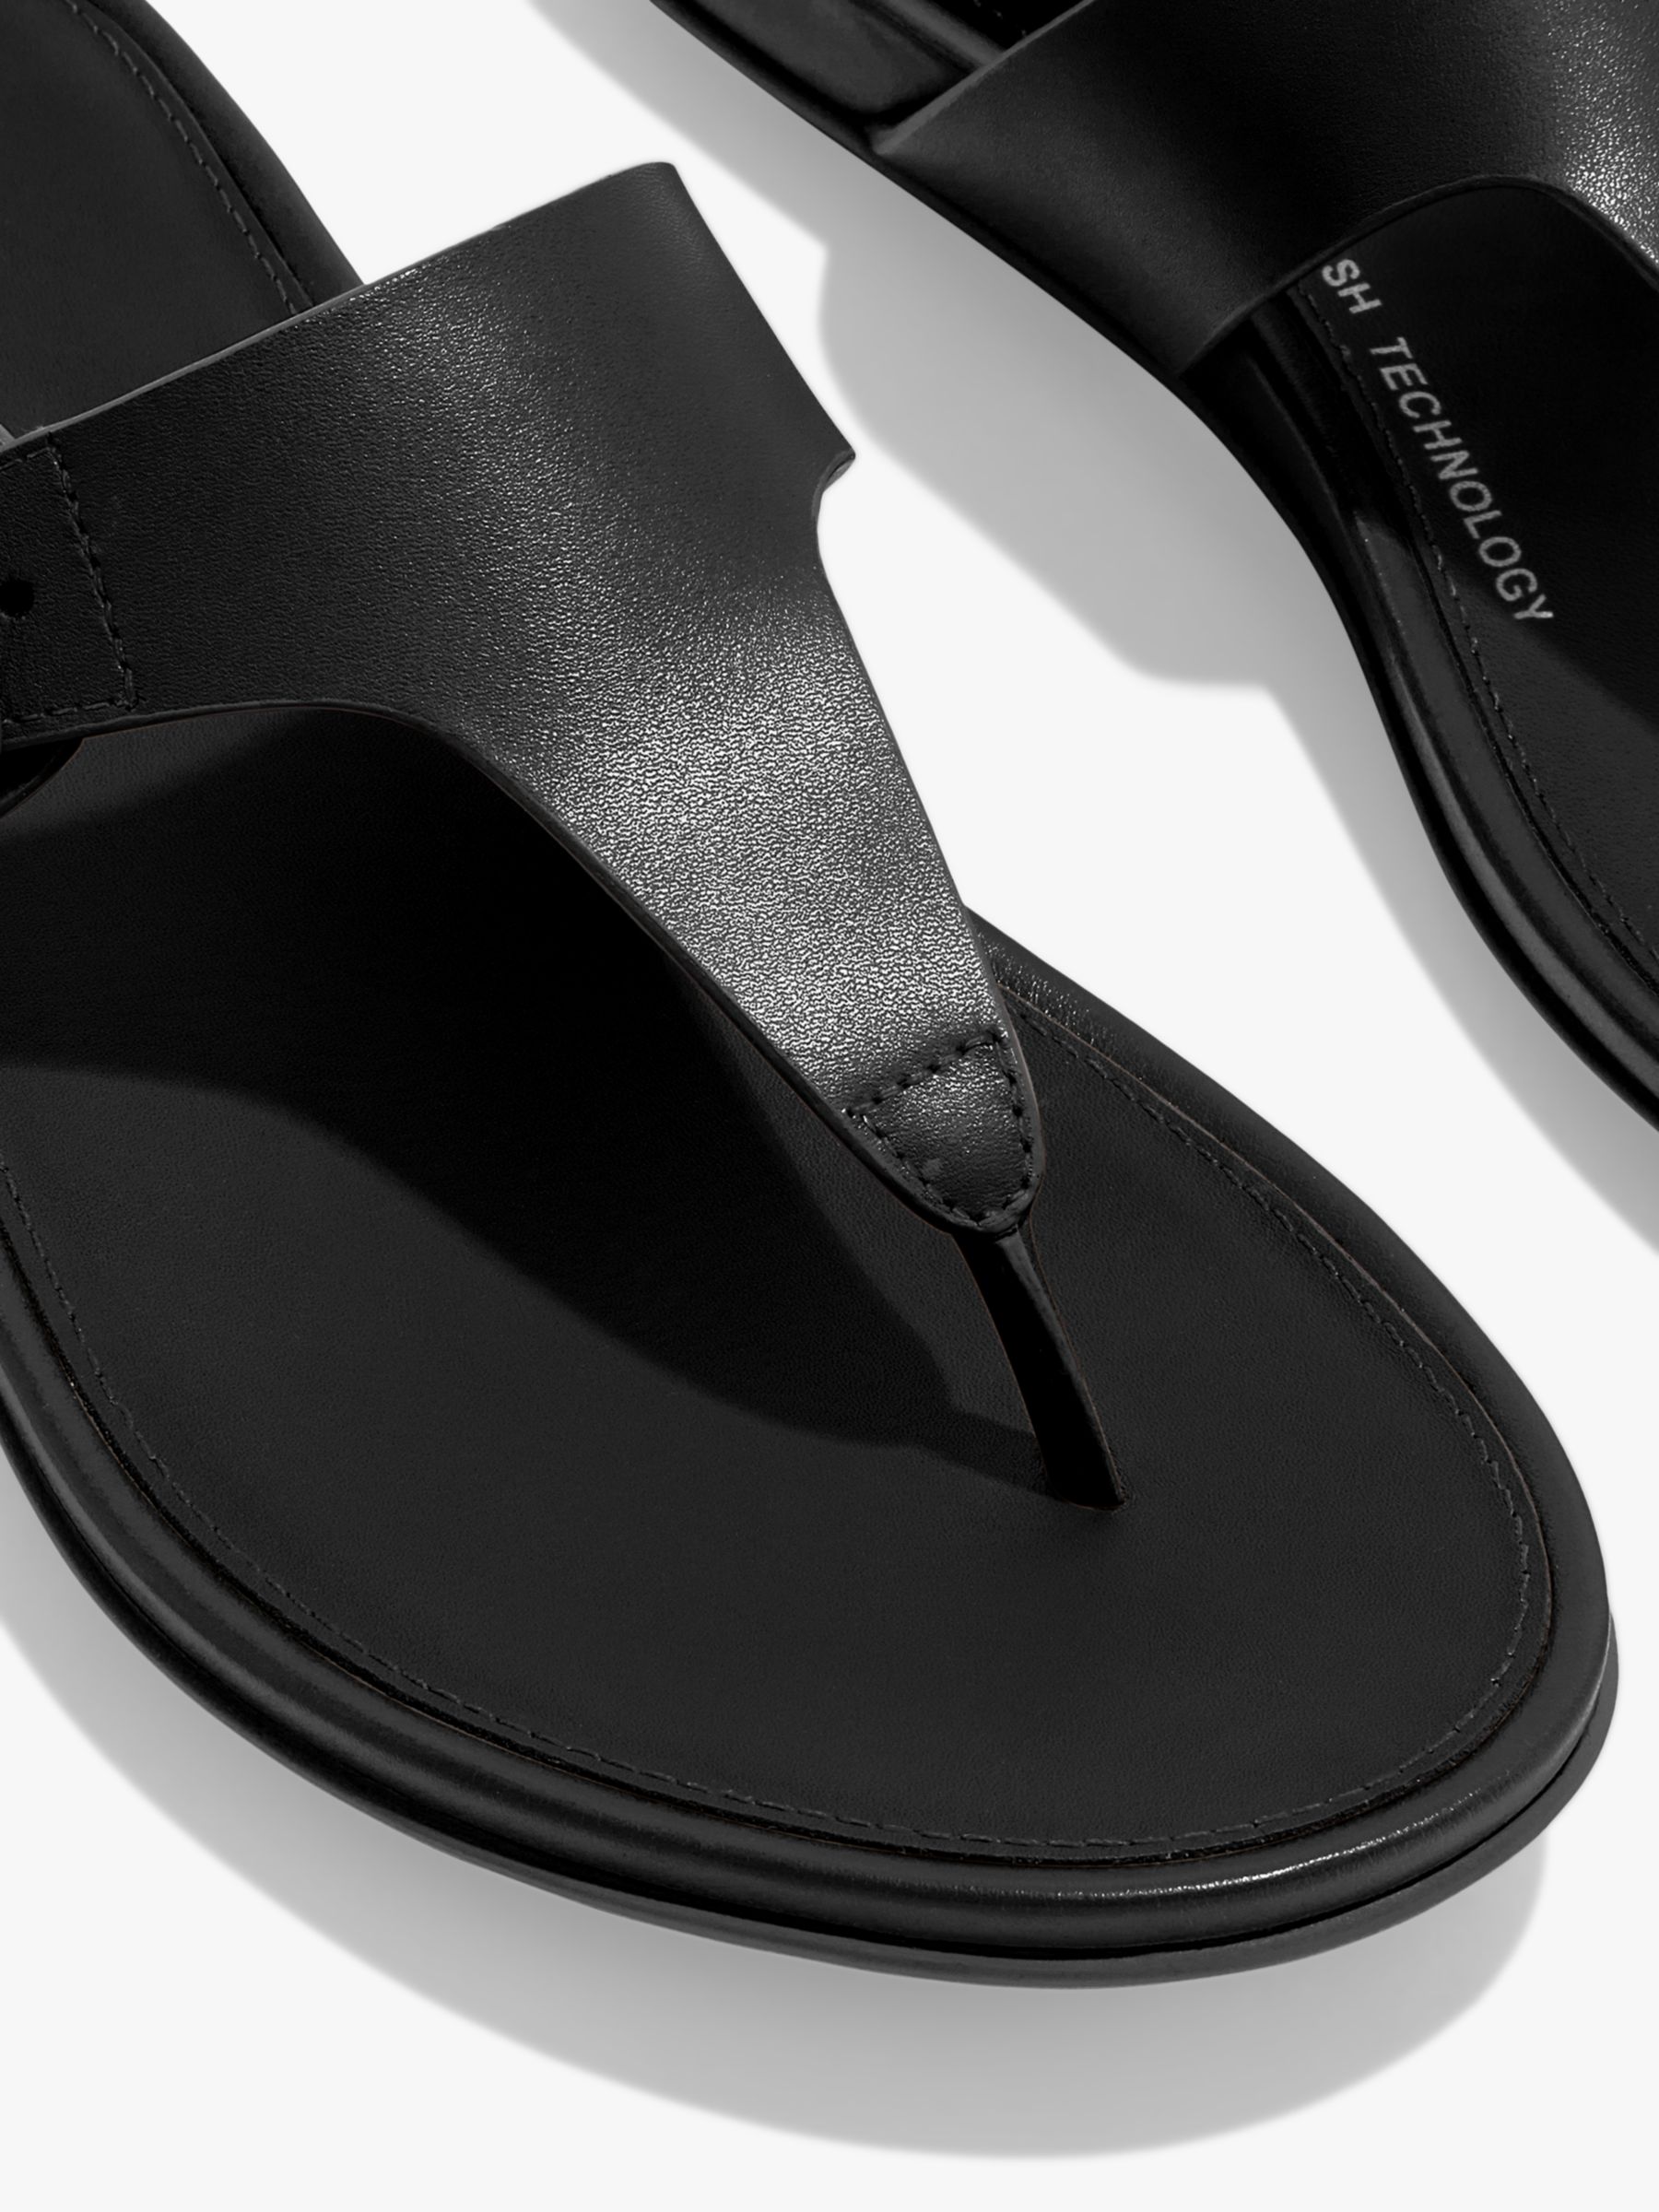 FitFlop Gracie Leather Buckle Detail Flip Flops, All Black at John ...